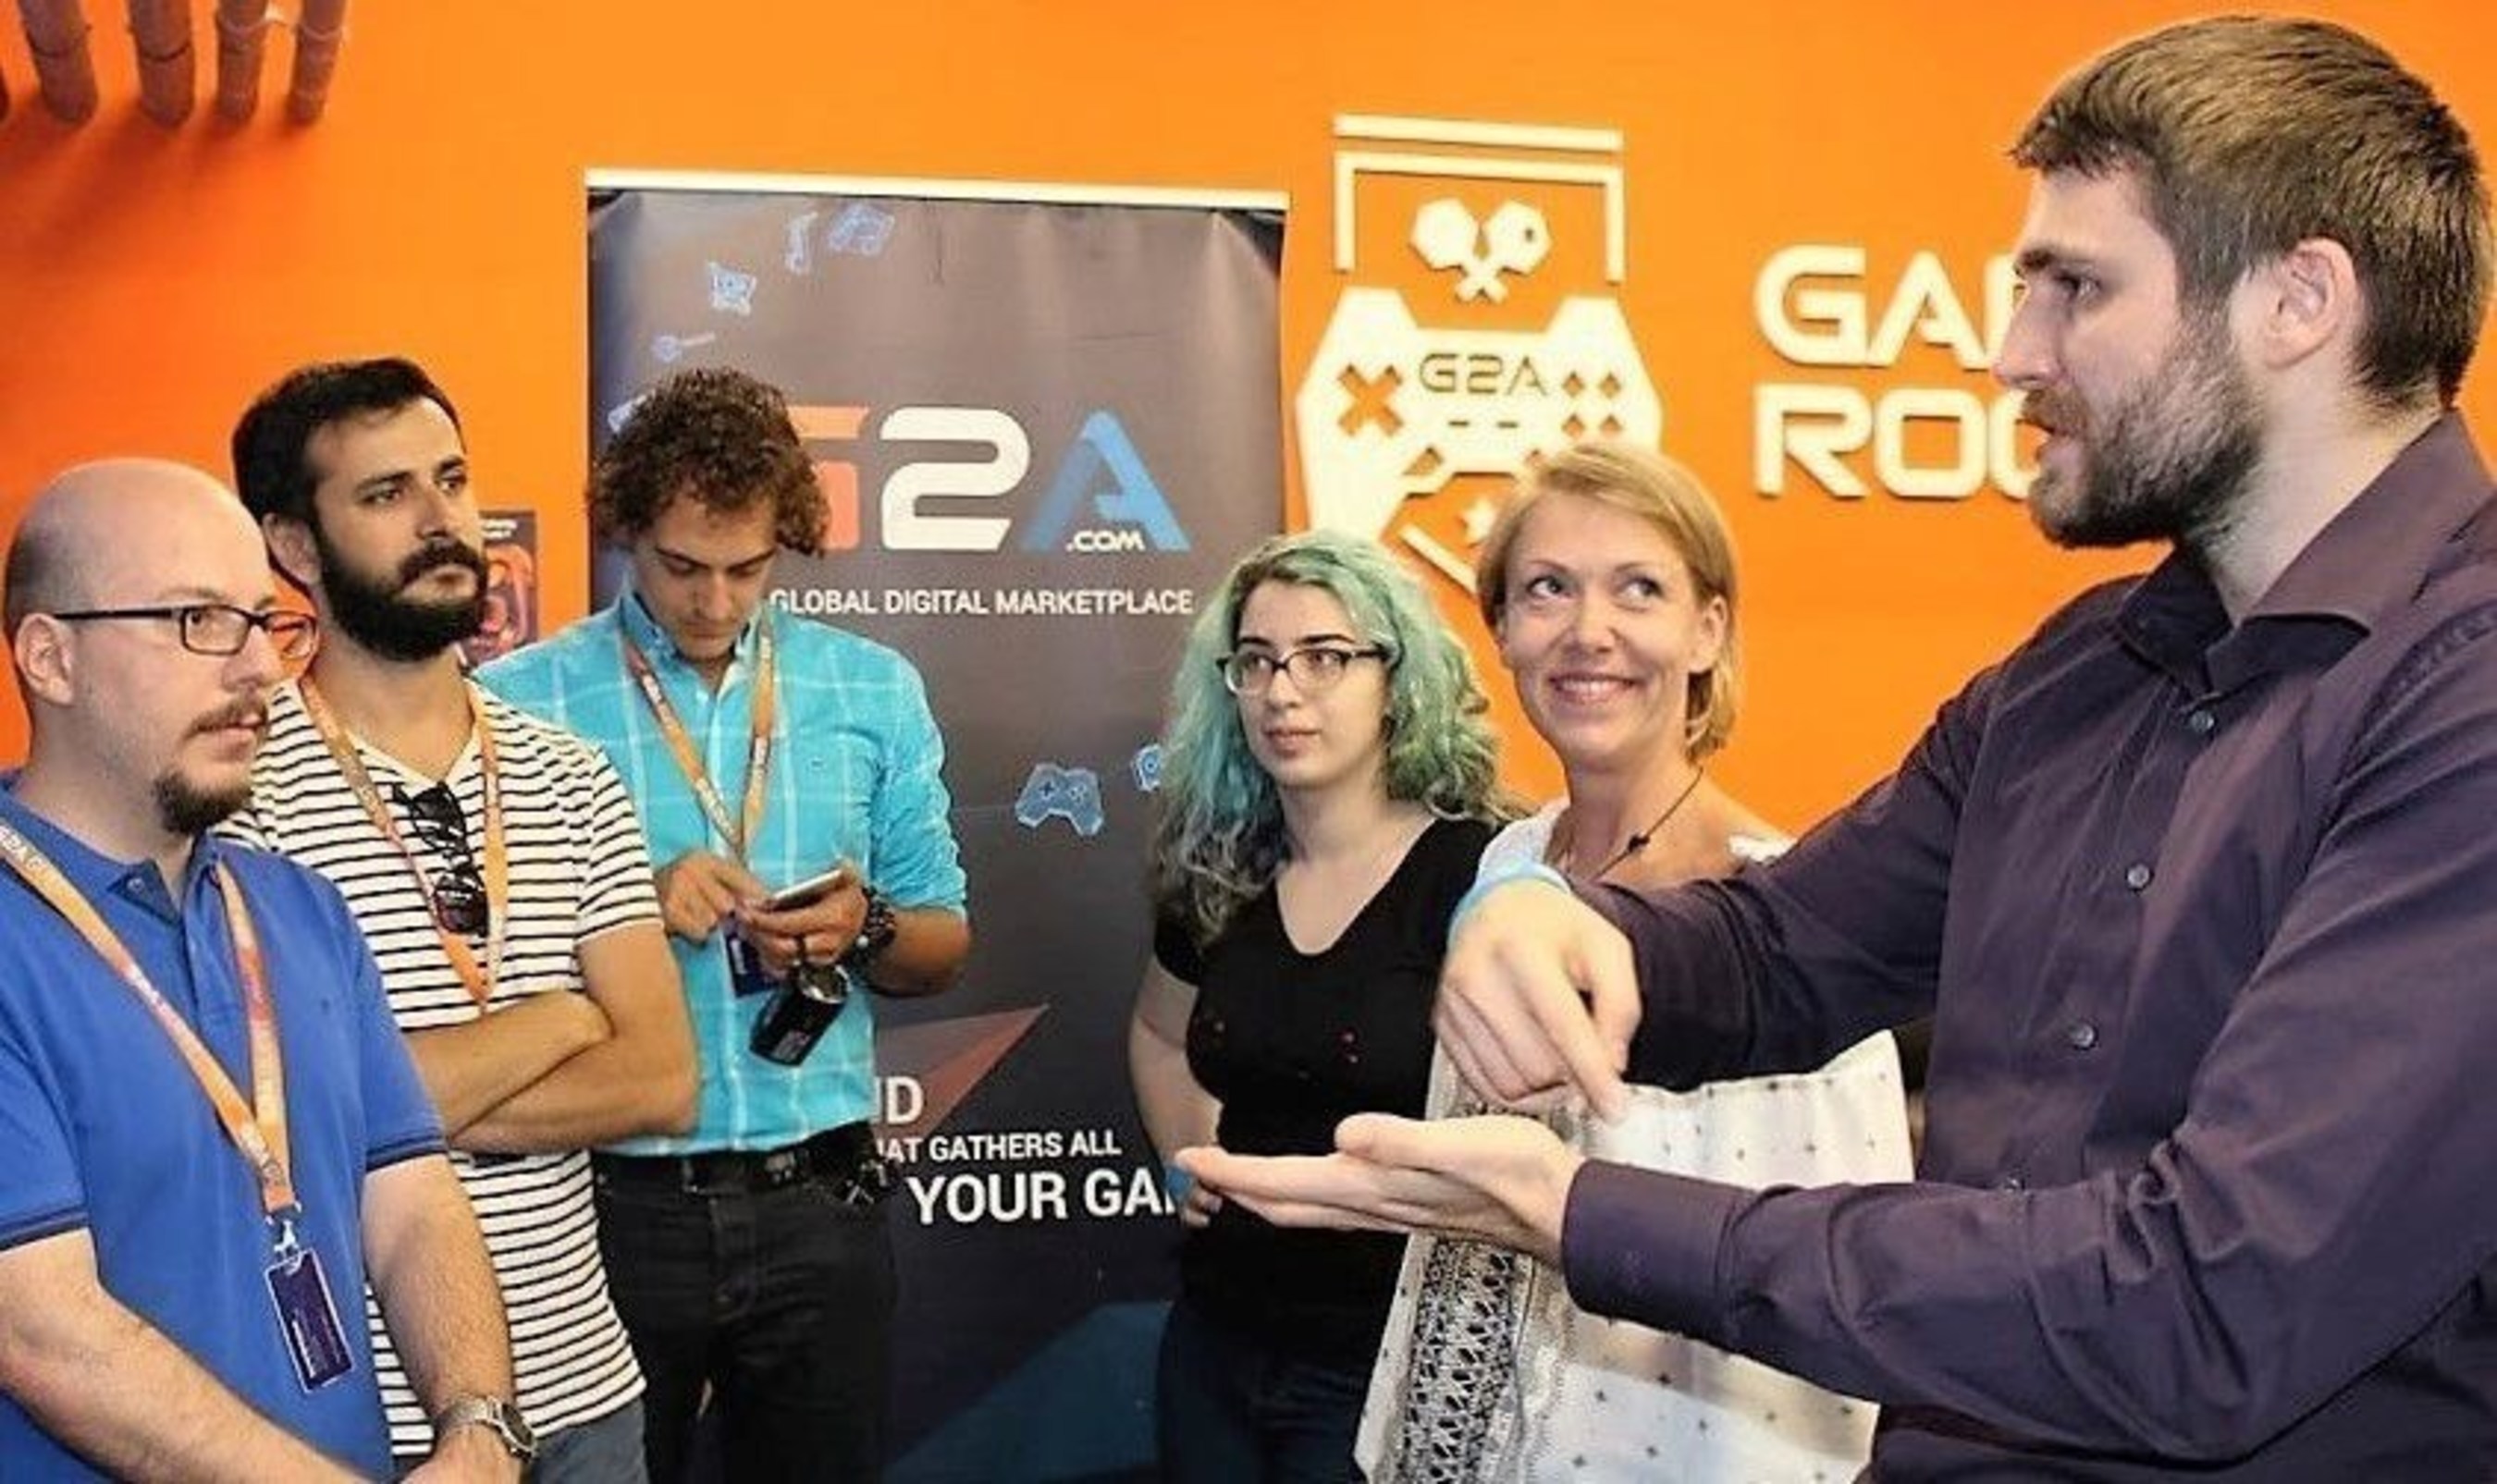 G2A's CMO and co-founder, Dawid Rozek, talking to journalists in the G2A gamesroom, responding to their questions about 'the early days of G2A'. (PRNewsFoto/G2A.COM)